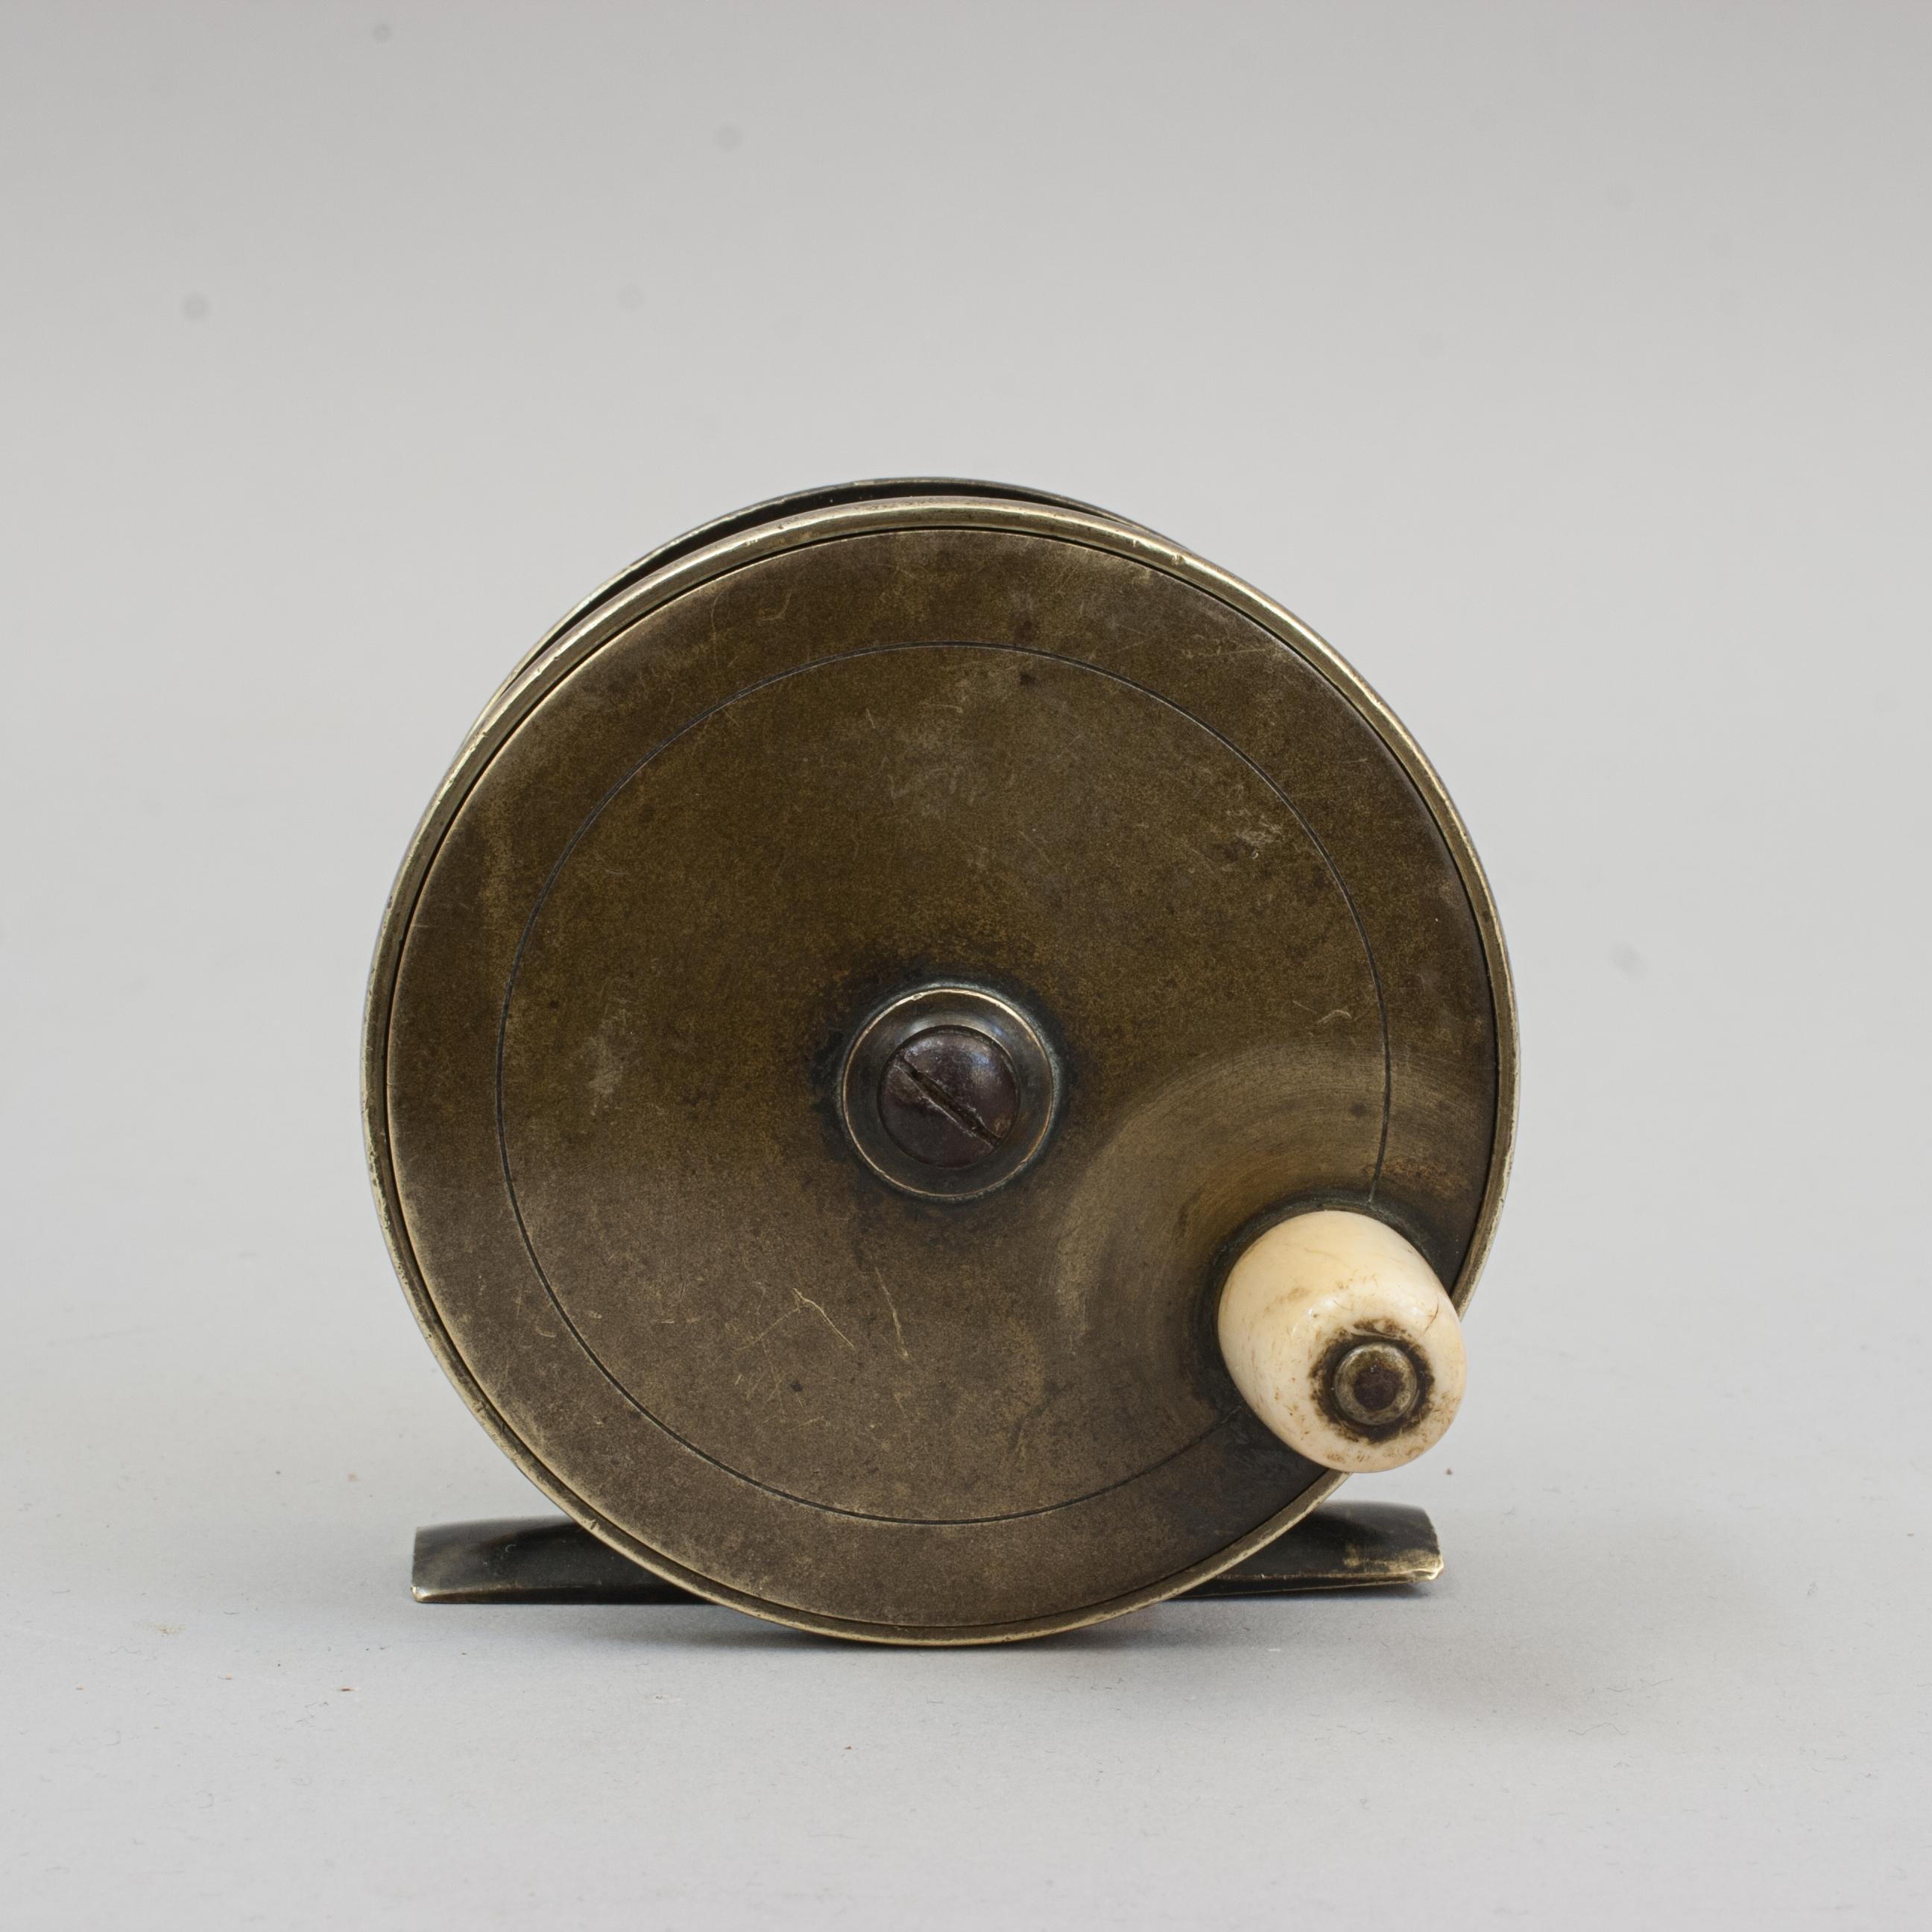 Brass Fishing Reel By Farlows.
A very good 3 inch brass fishing reel by Farlow, London. The reel has a lovely patina, brass foot plate (stamped with farlow's 'fish' logo) and a single horn handle. The back plate engraved 'Chas. Farlow & Co., Makers